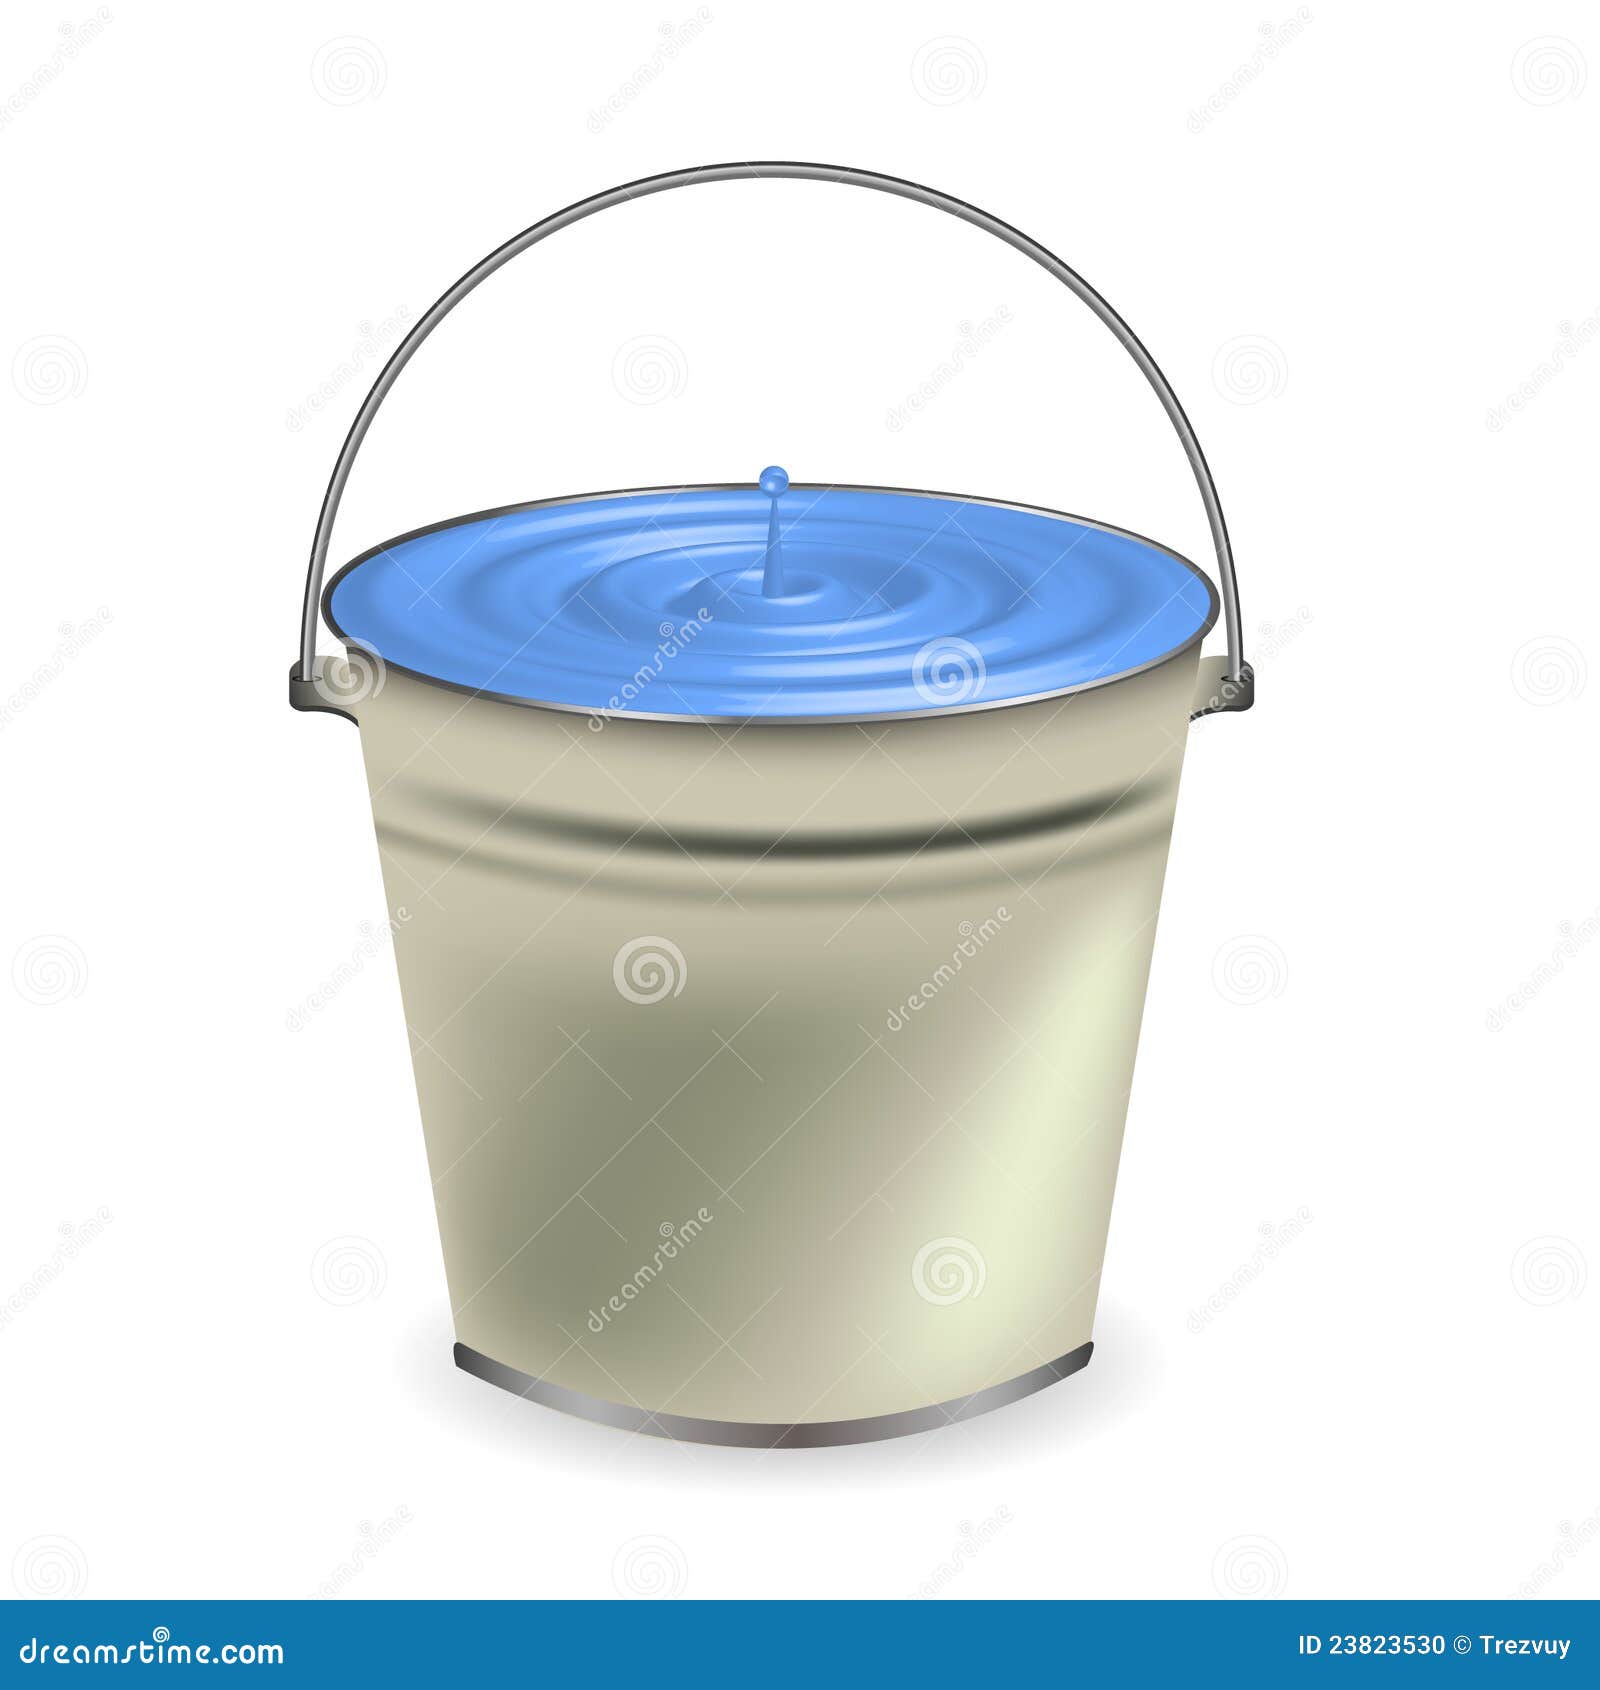 Bucket Of Water For Your Design Stock Photo  Image: 23823530